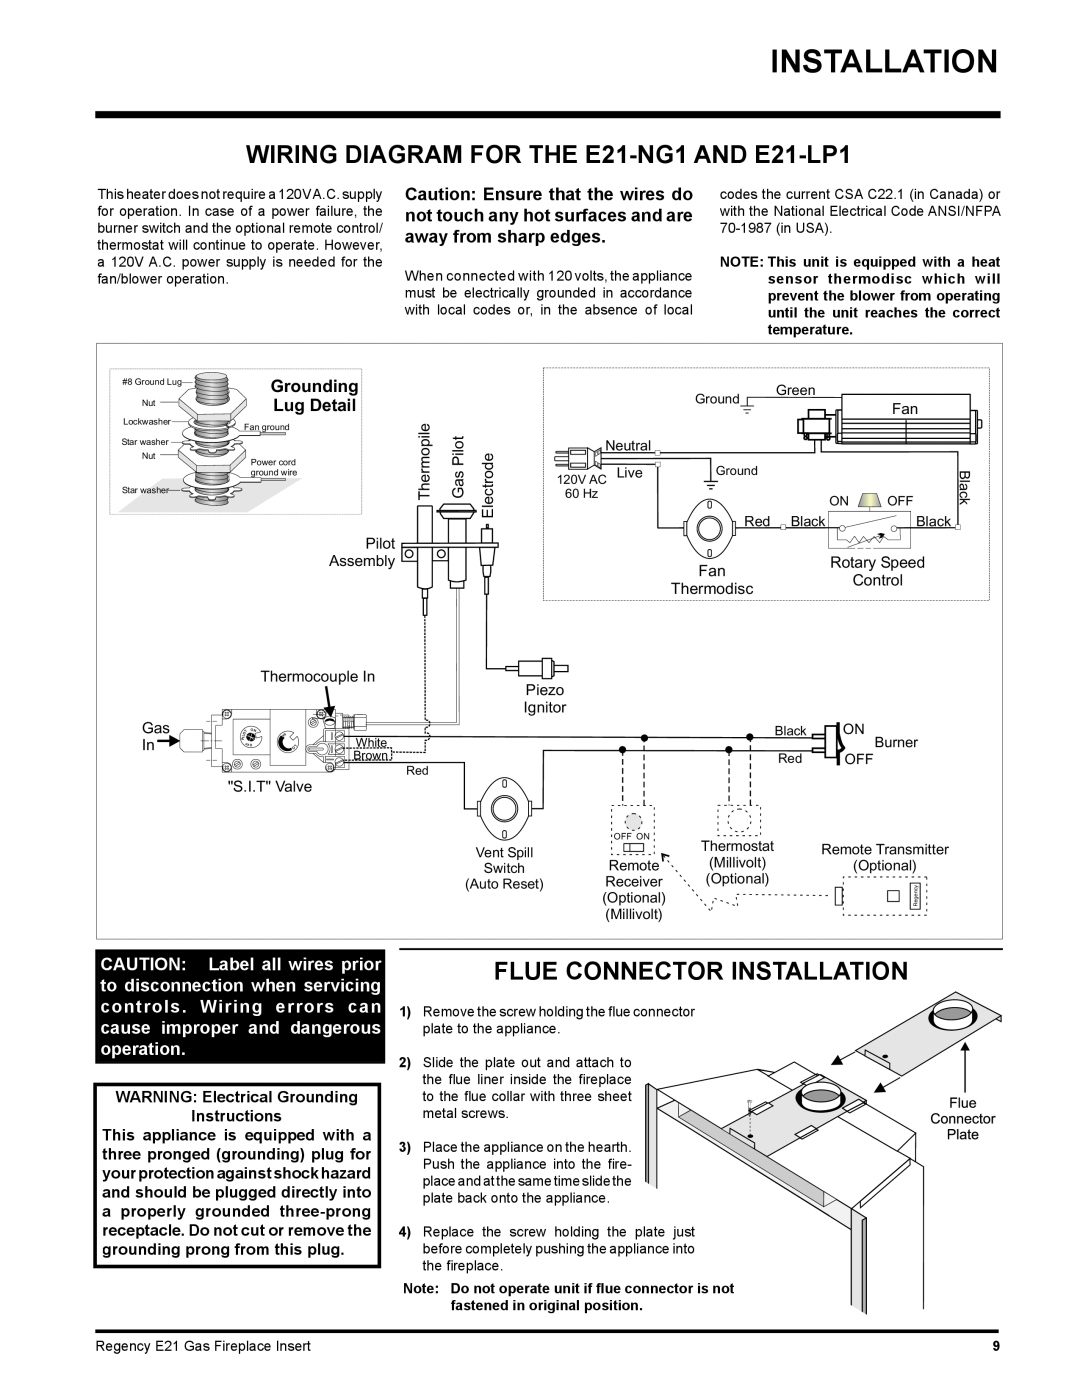 Regency Installation, WIRING DIAGRAM FOR THE E21-NG1AND E21-LP1, Grounding, Lug Detail, Pilot Assembly, Thermopile 